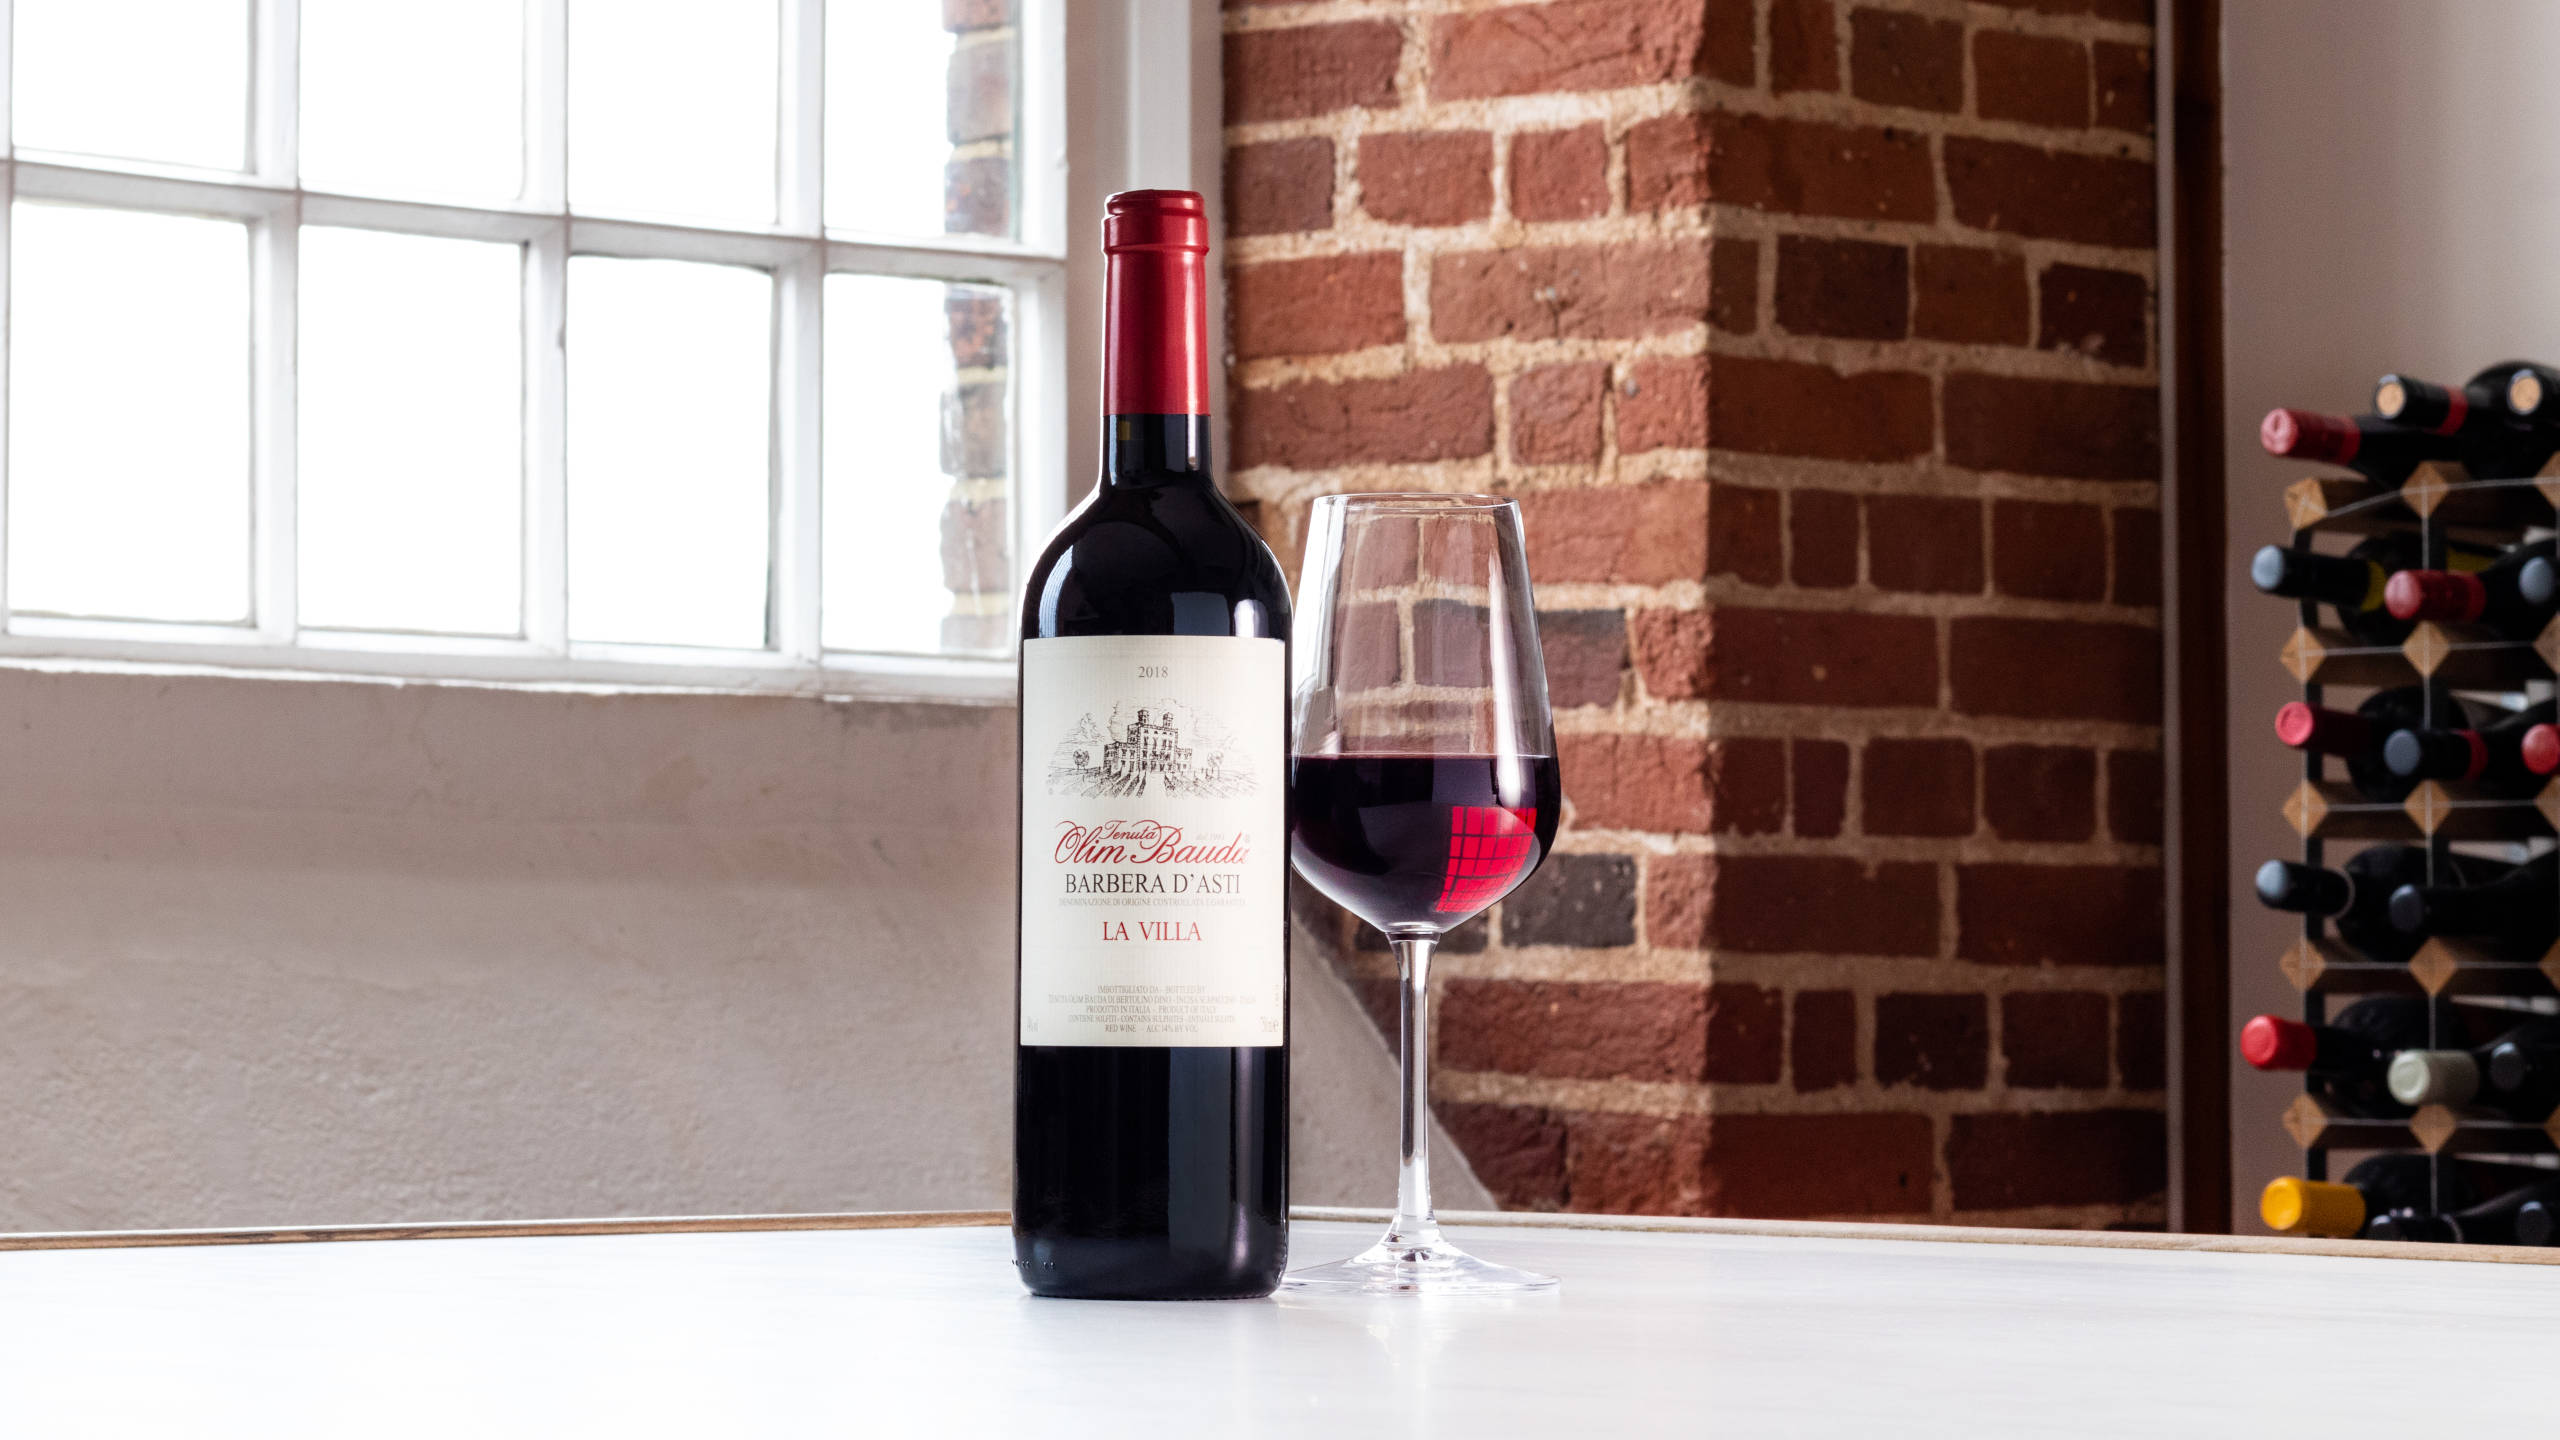 Quick to Red Guide | Virgin Wines